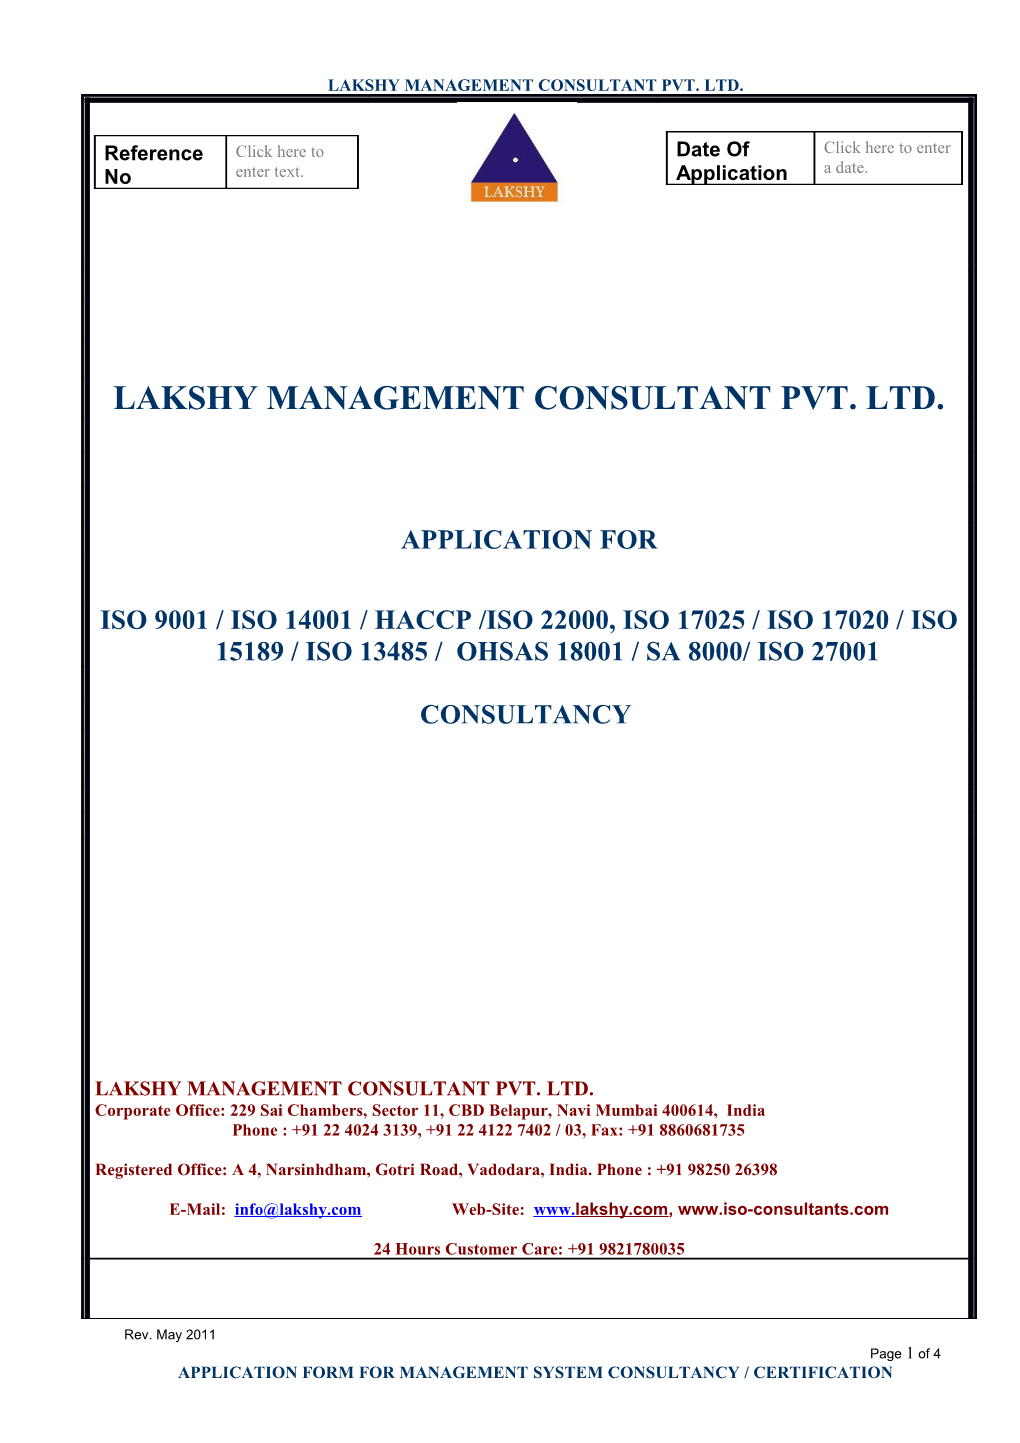 Application Form for Management System Consultancy and Certification